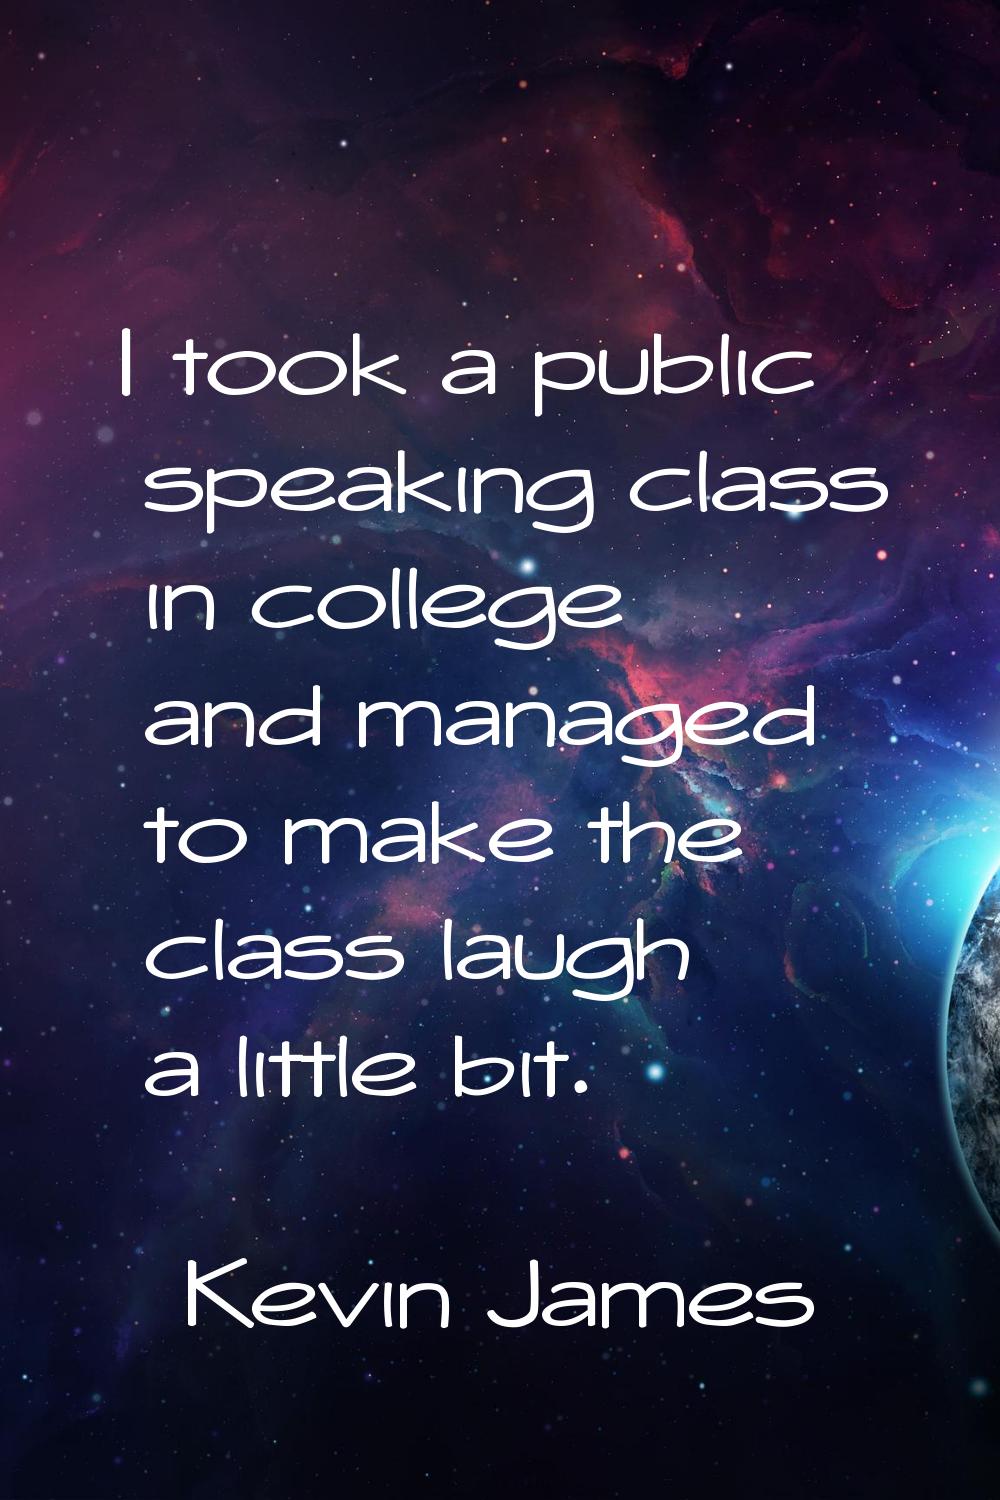 I took a public speaking class in college and managed to make the class laugh a little bit.